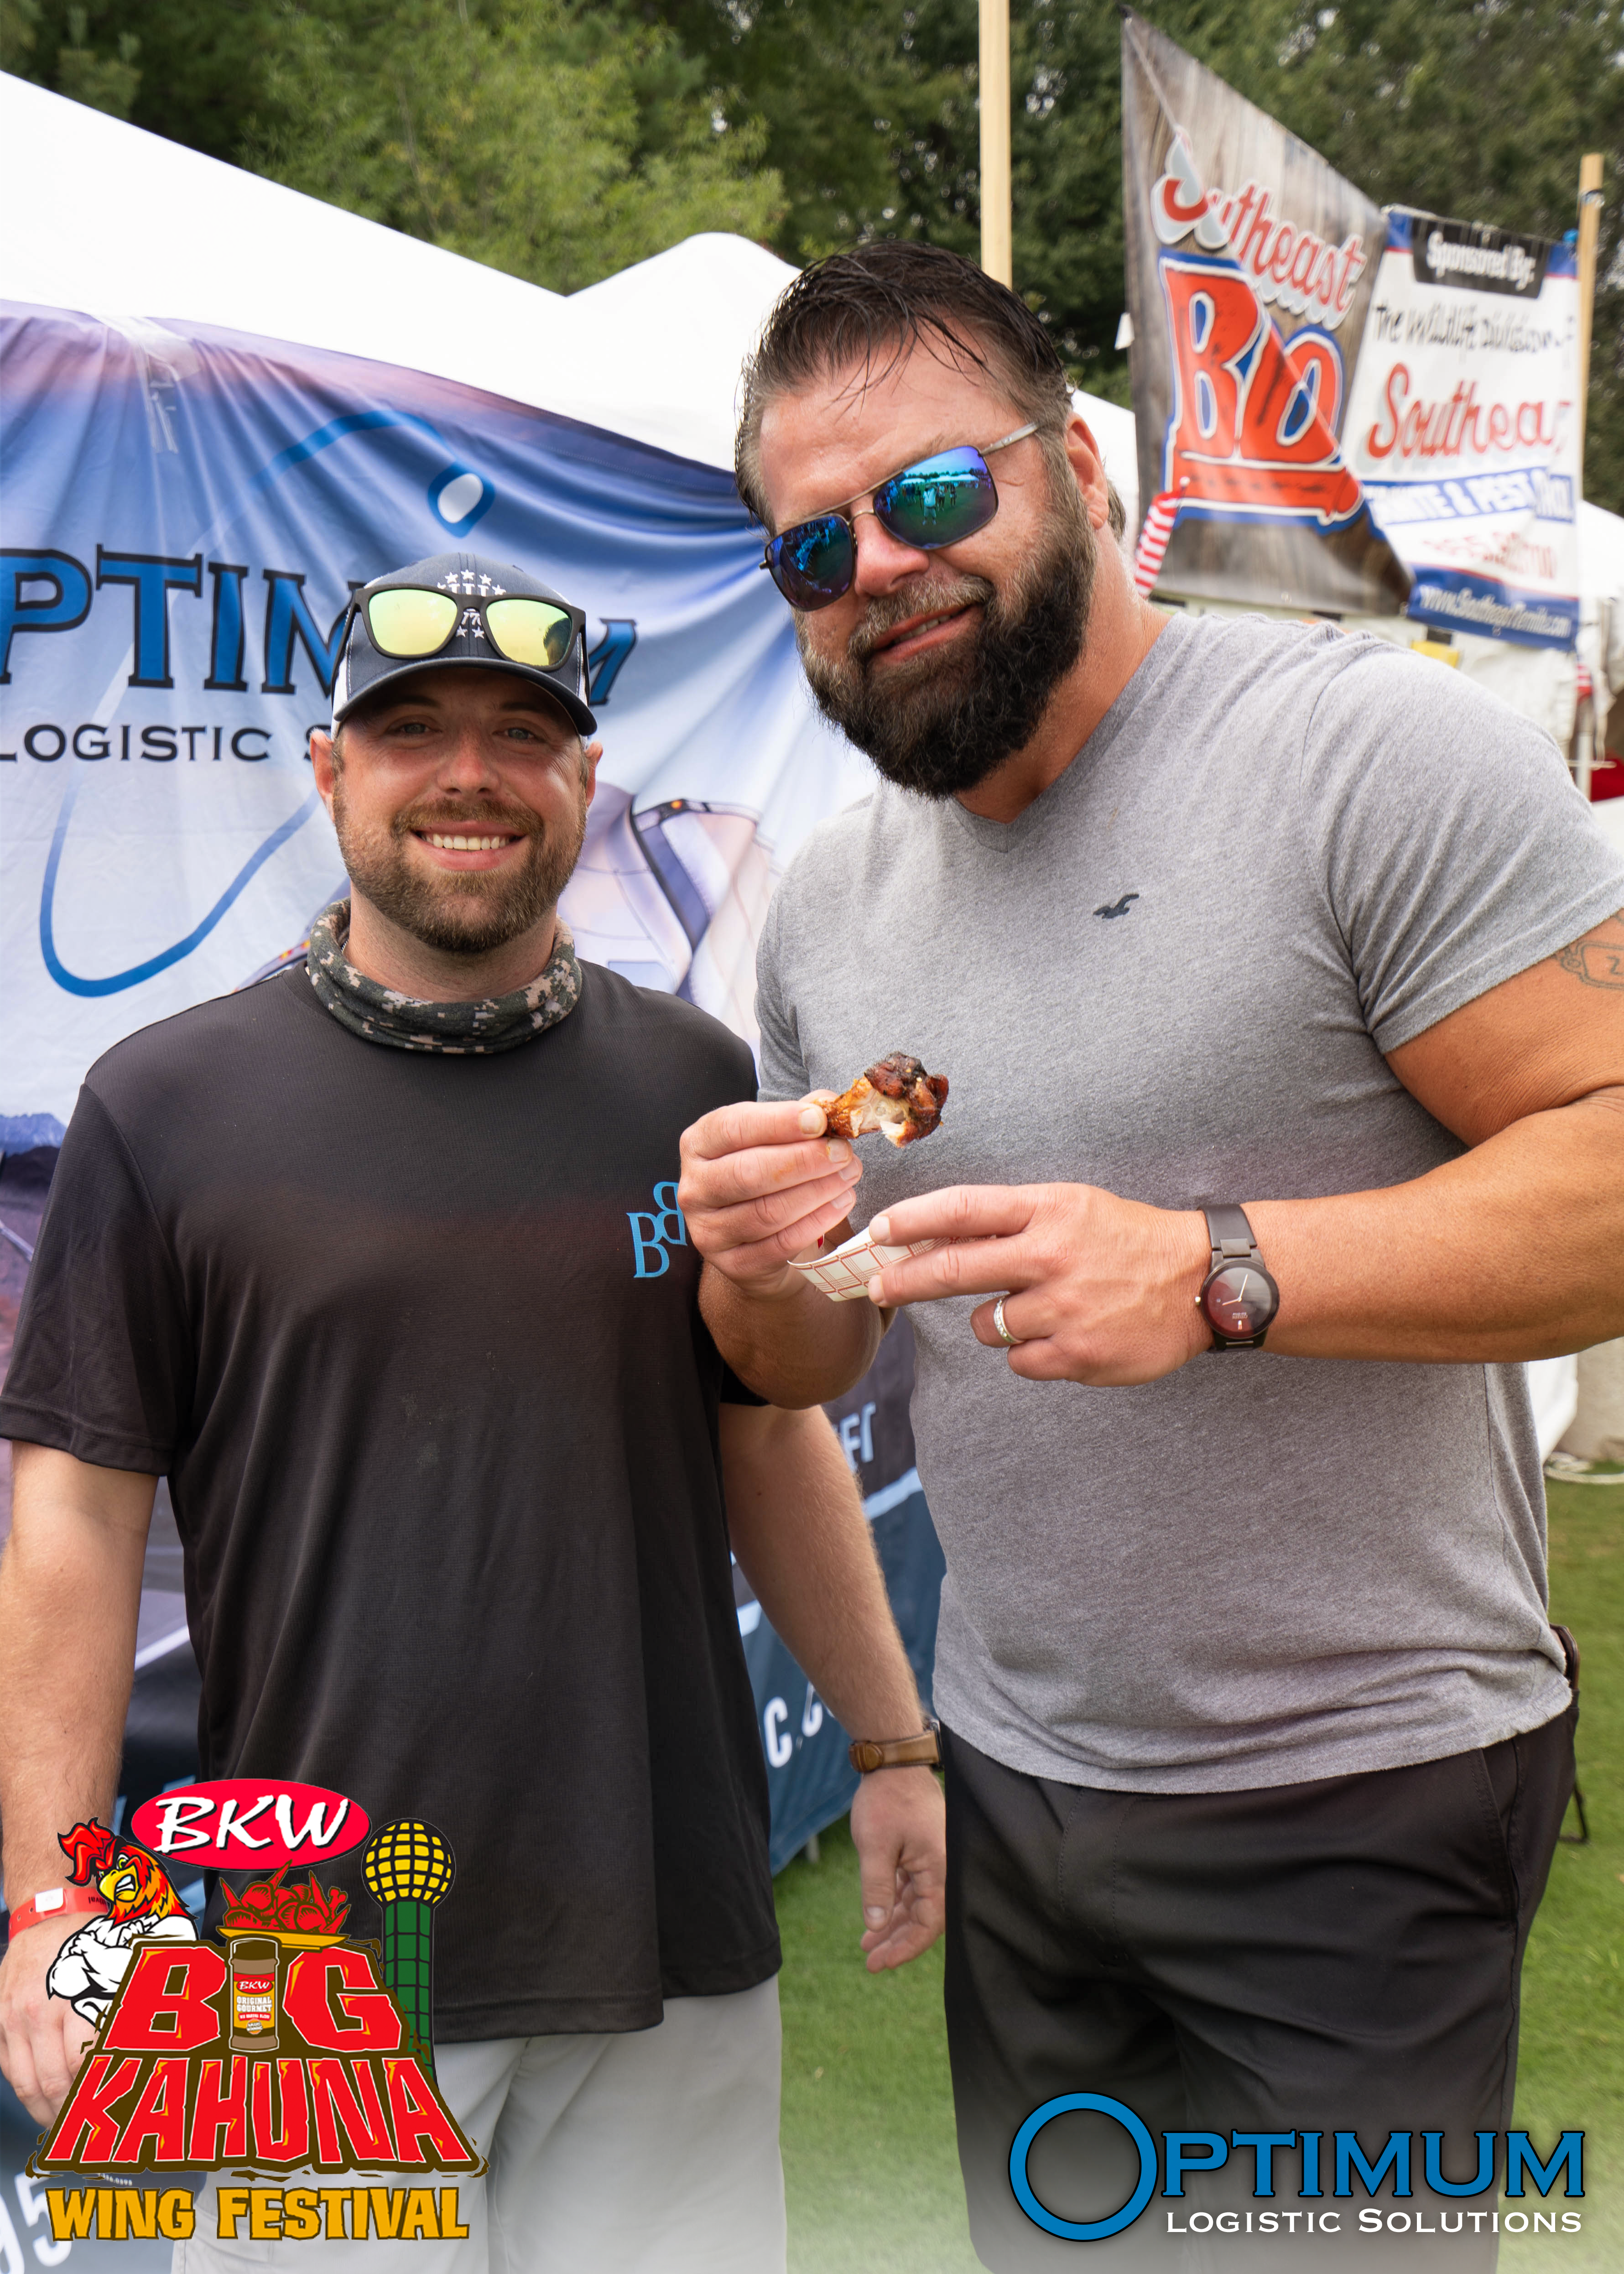 Chris and Rick enjoying a chicken wing at the Big Kahuna Wing Festival Fundraiser